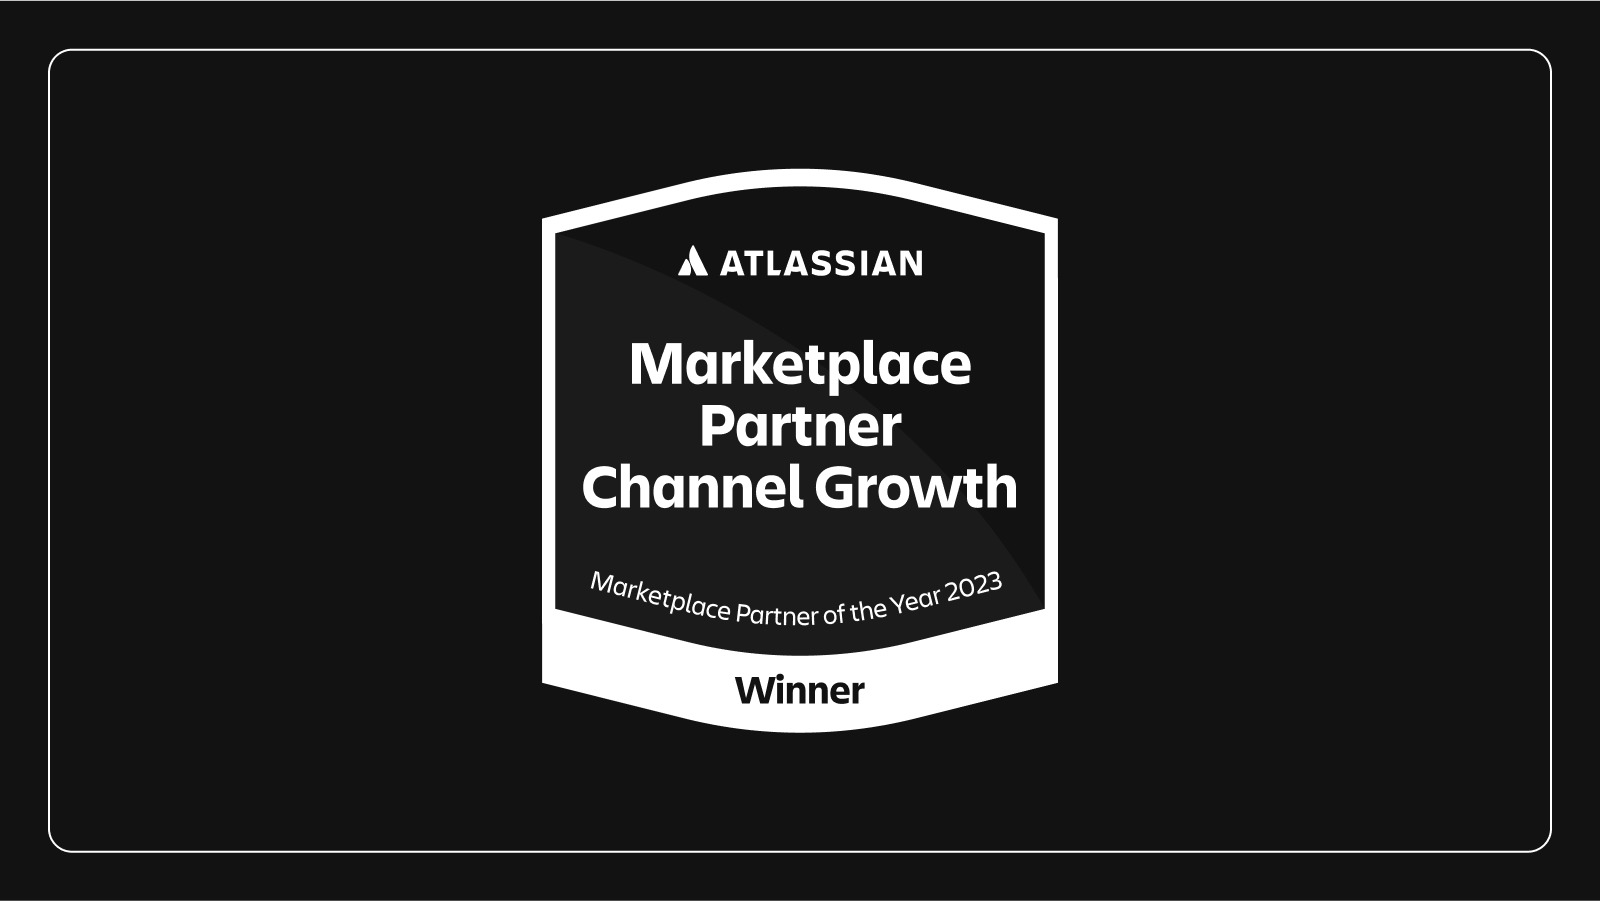 Appfire is Atlassian Partner of the Year 2023